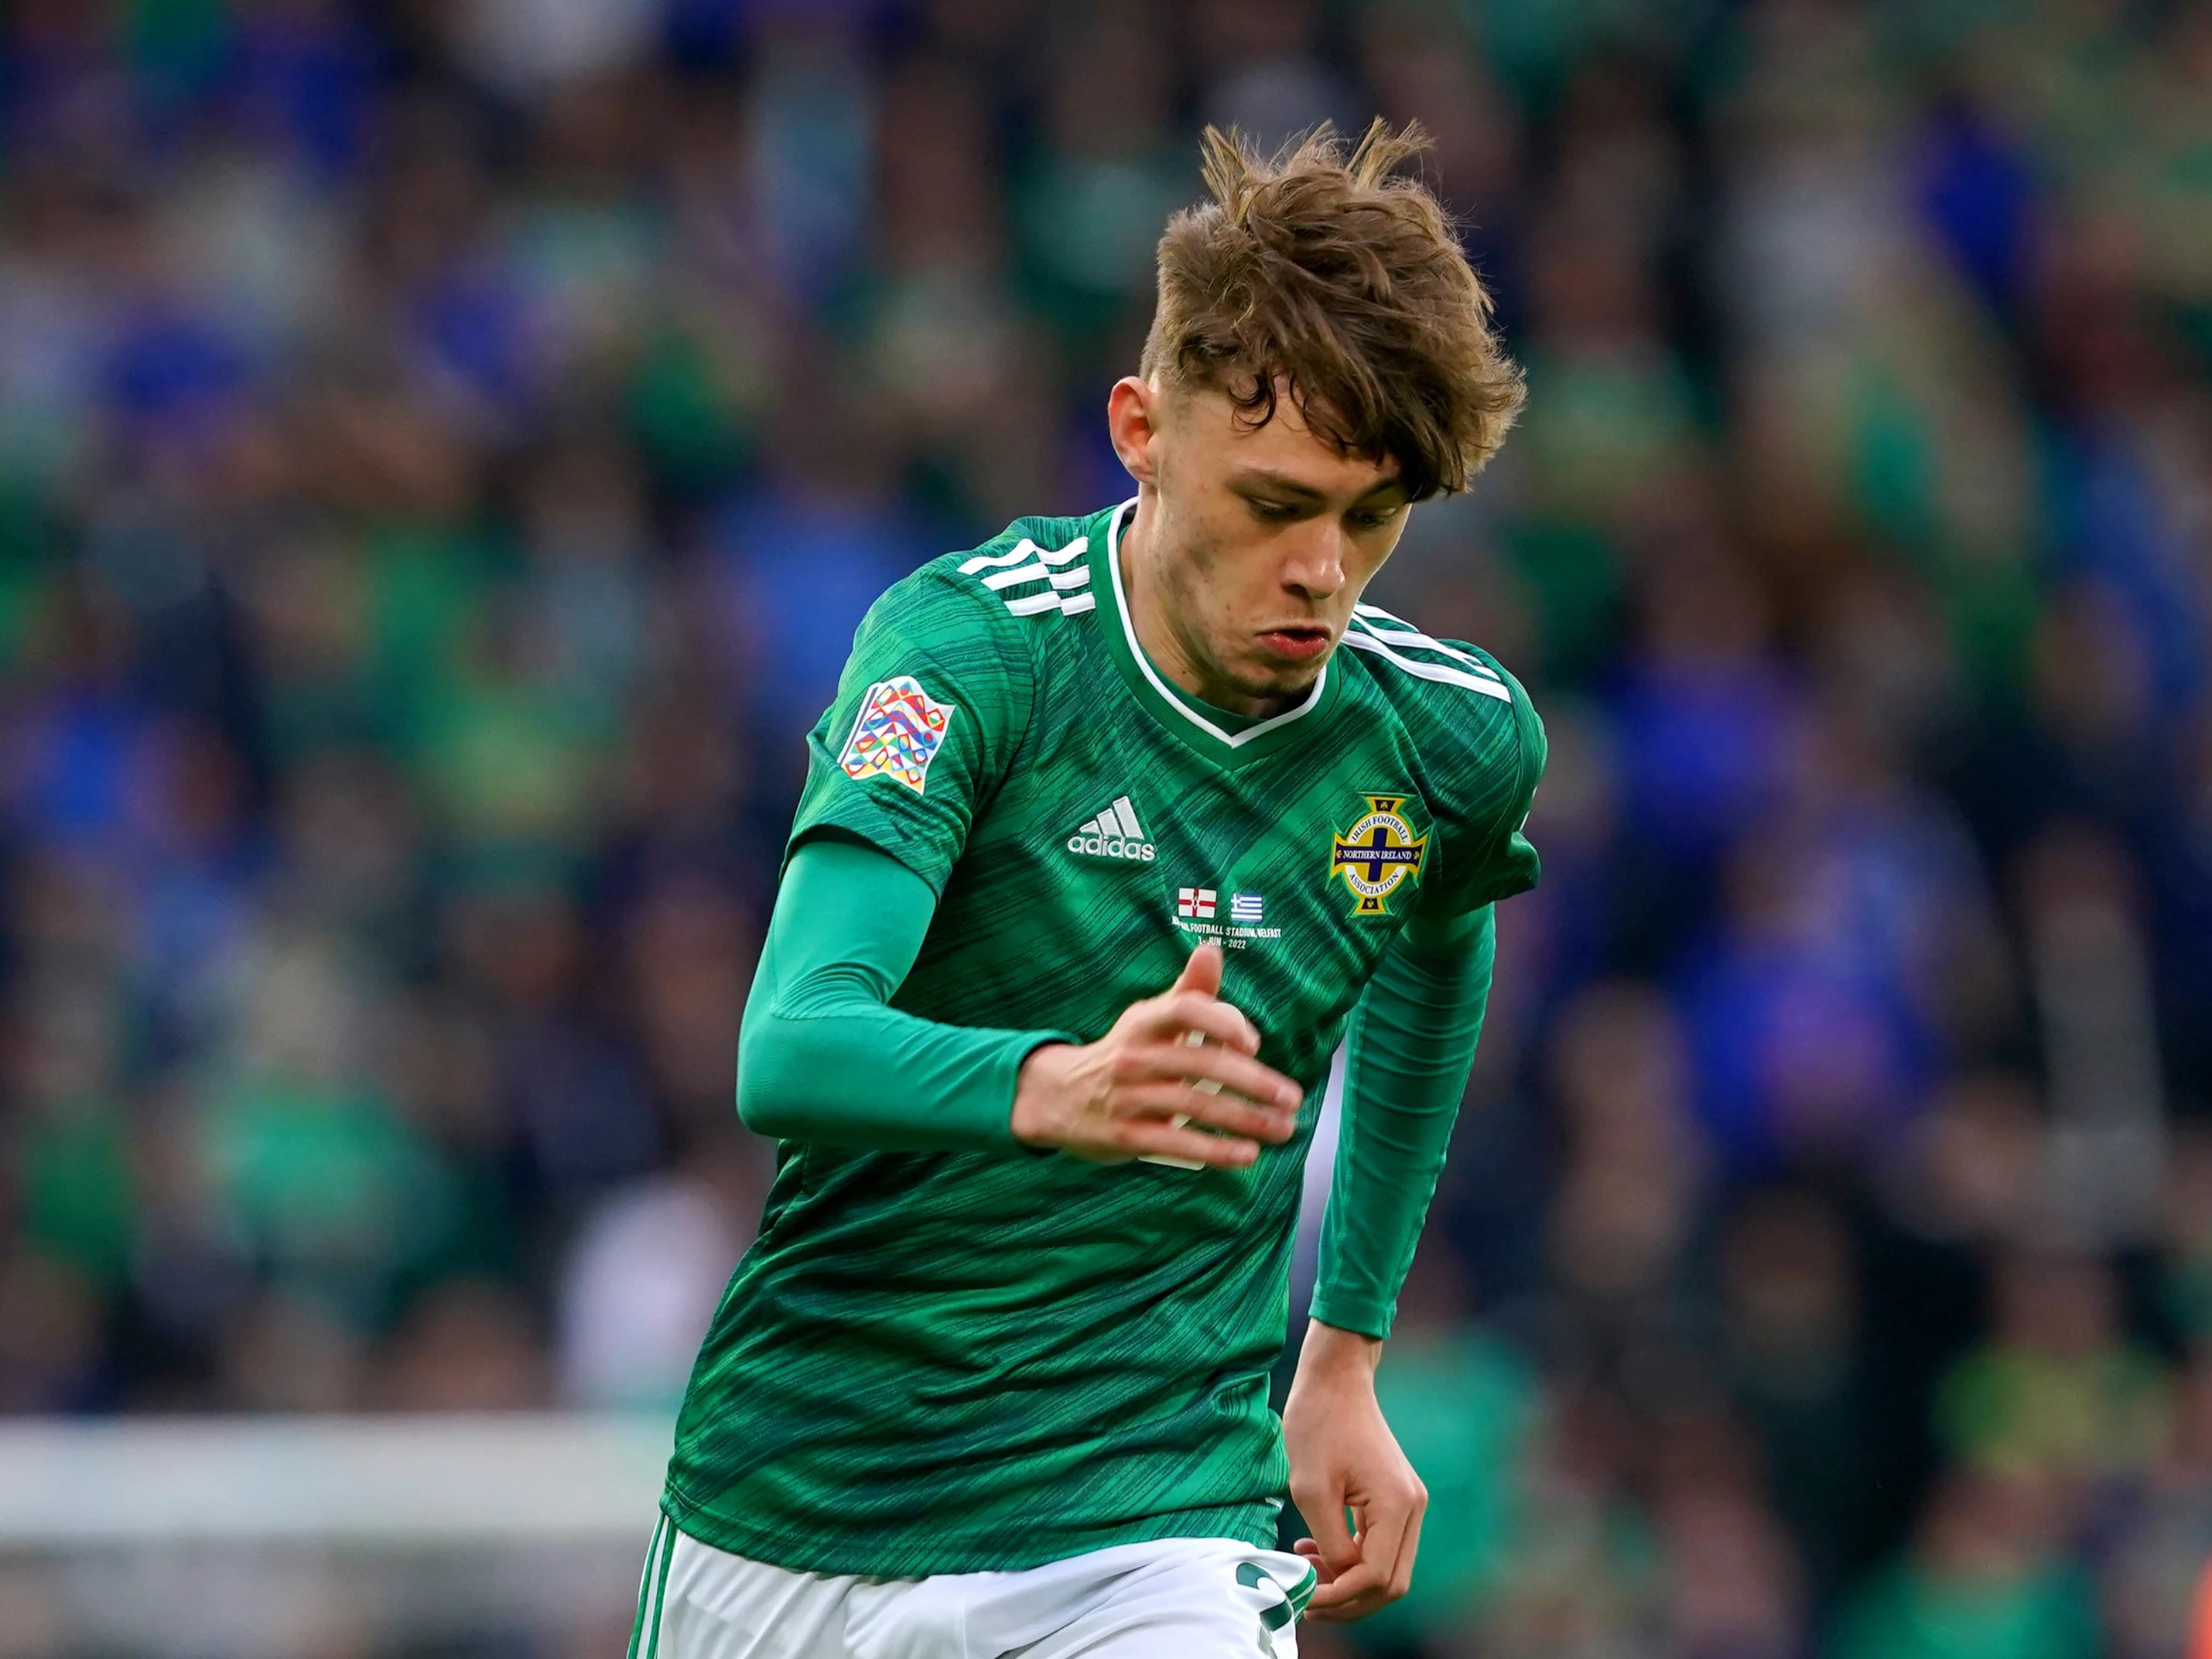 Conor Bradley has taken major strides with Northern Ireland in the last year